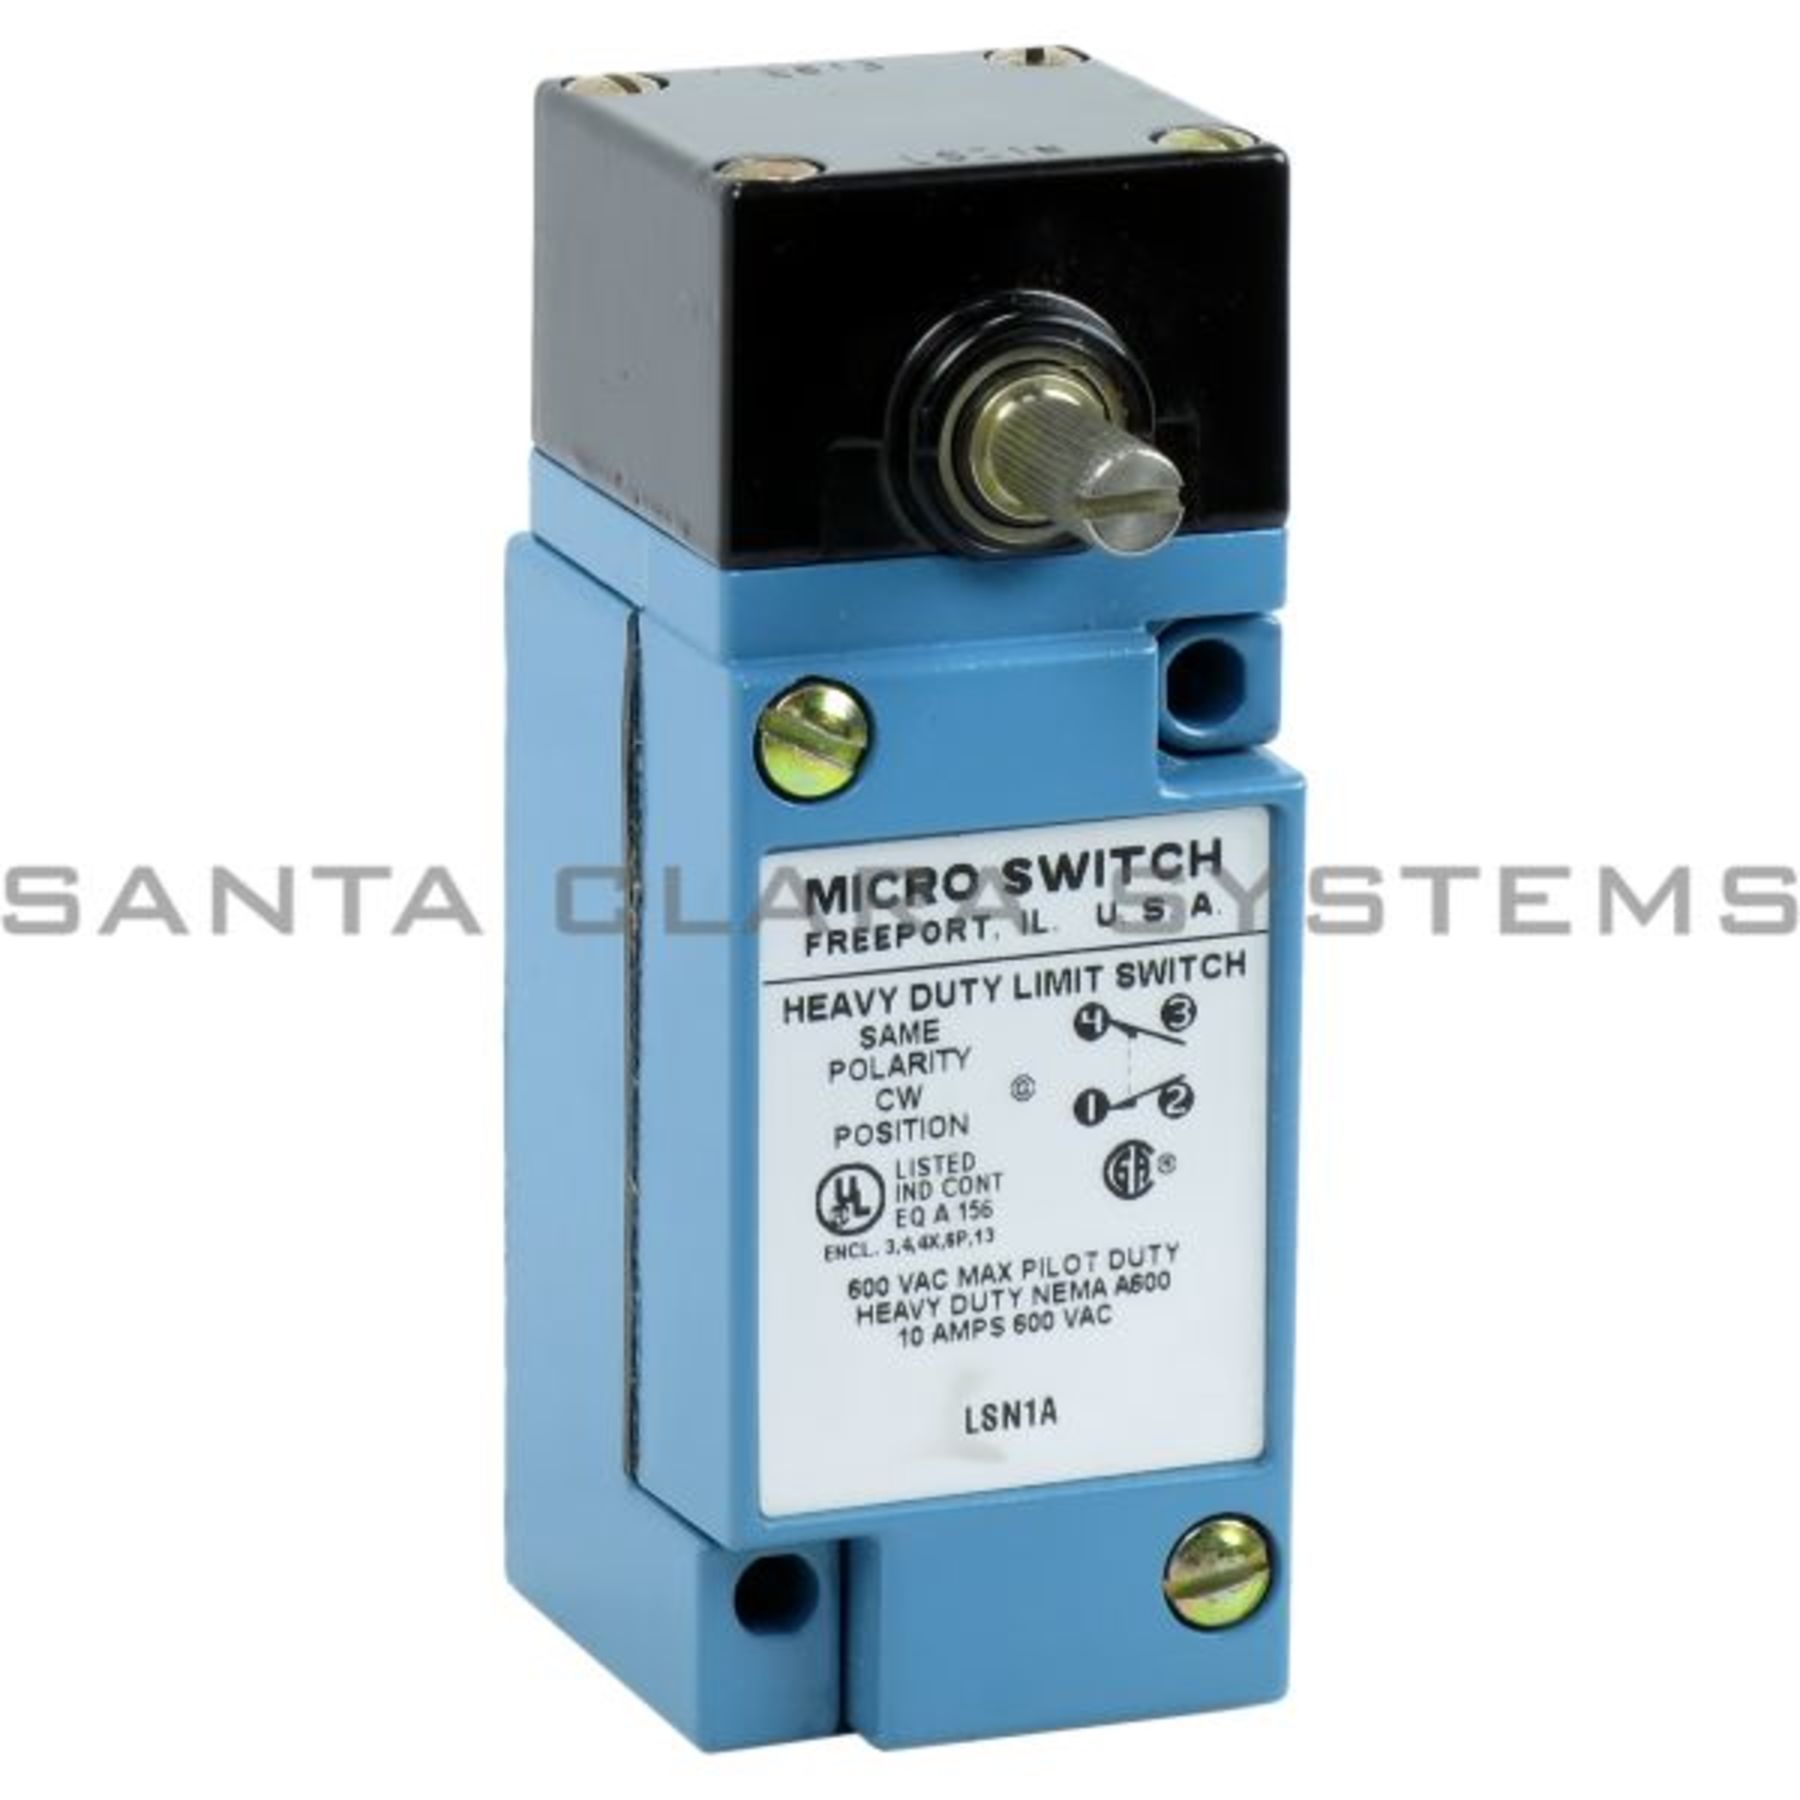 MICRO SWITCH LIMIT SWITCH 600VAC MAX PILOT DUTY 10 AMP CONT LSN7L 